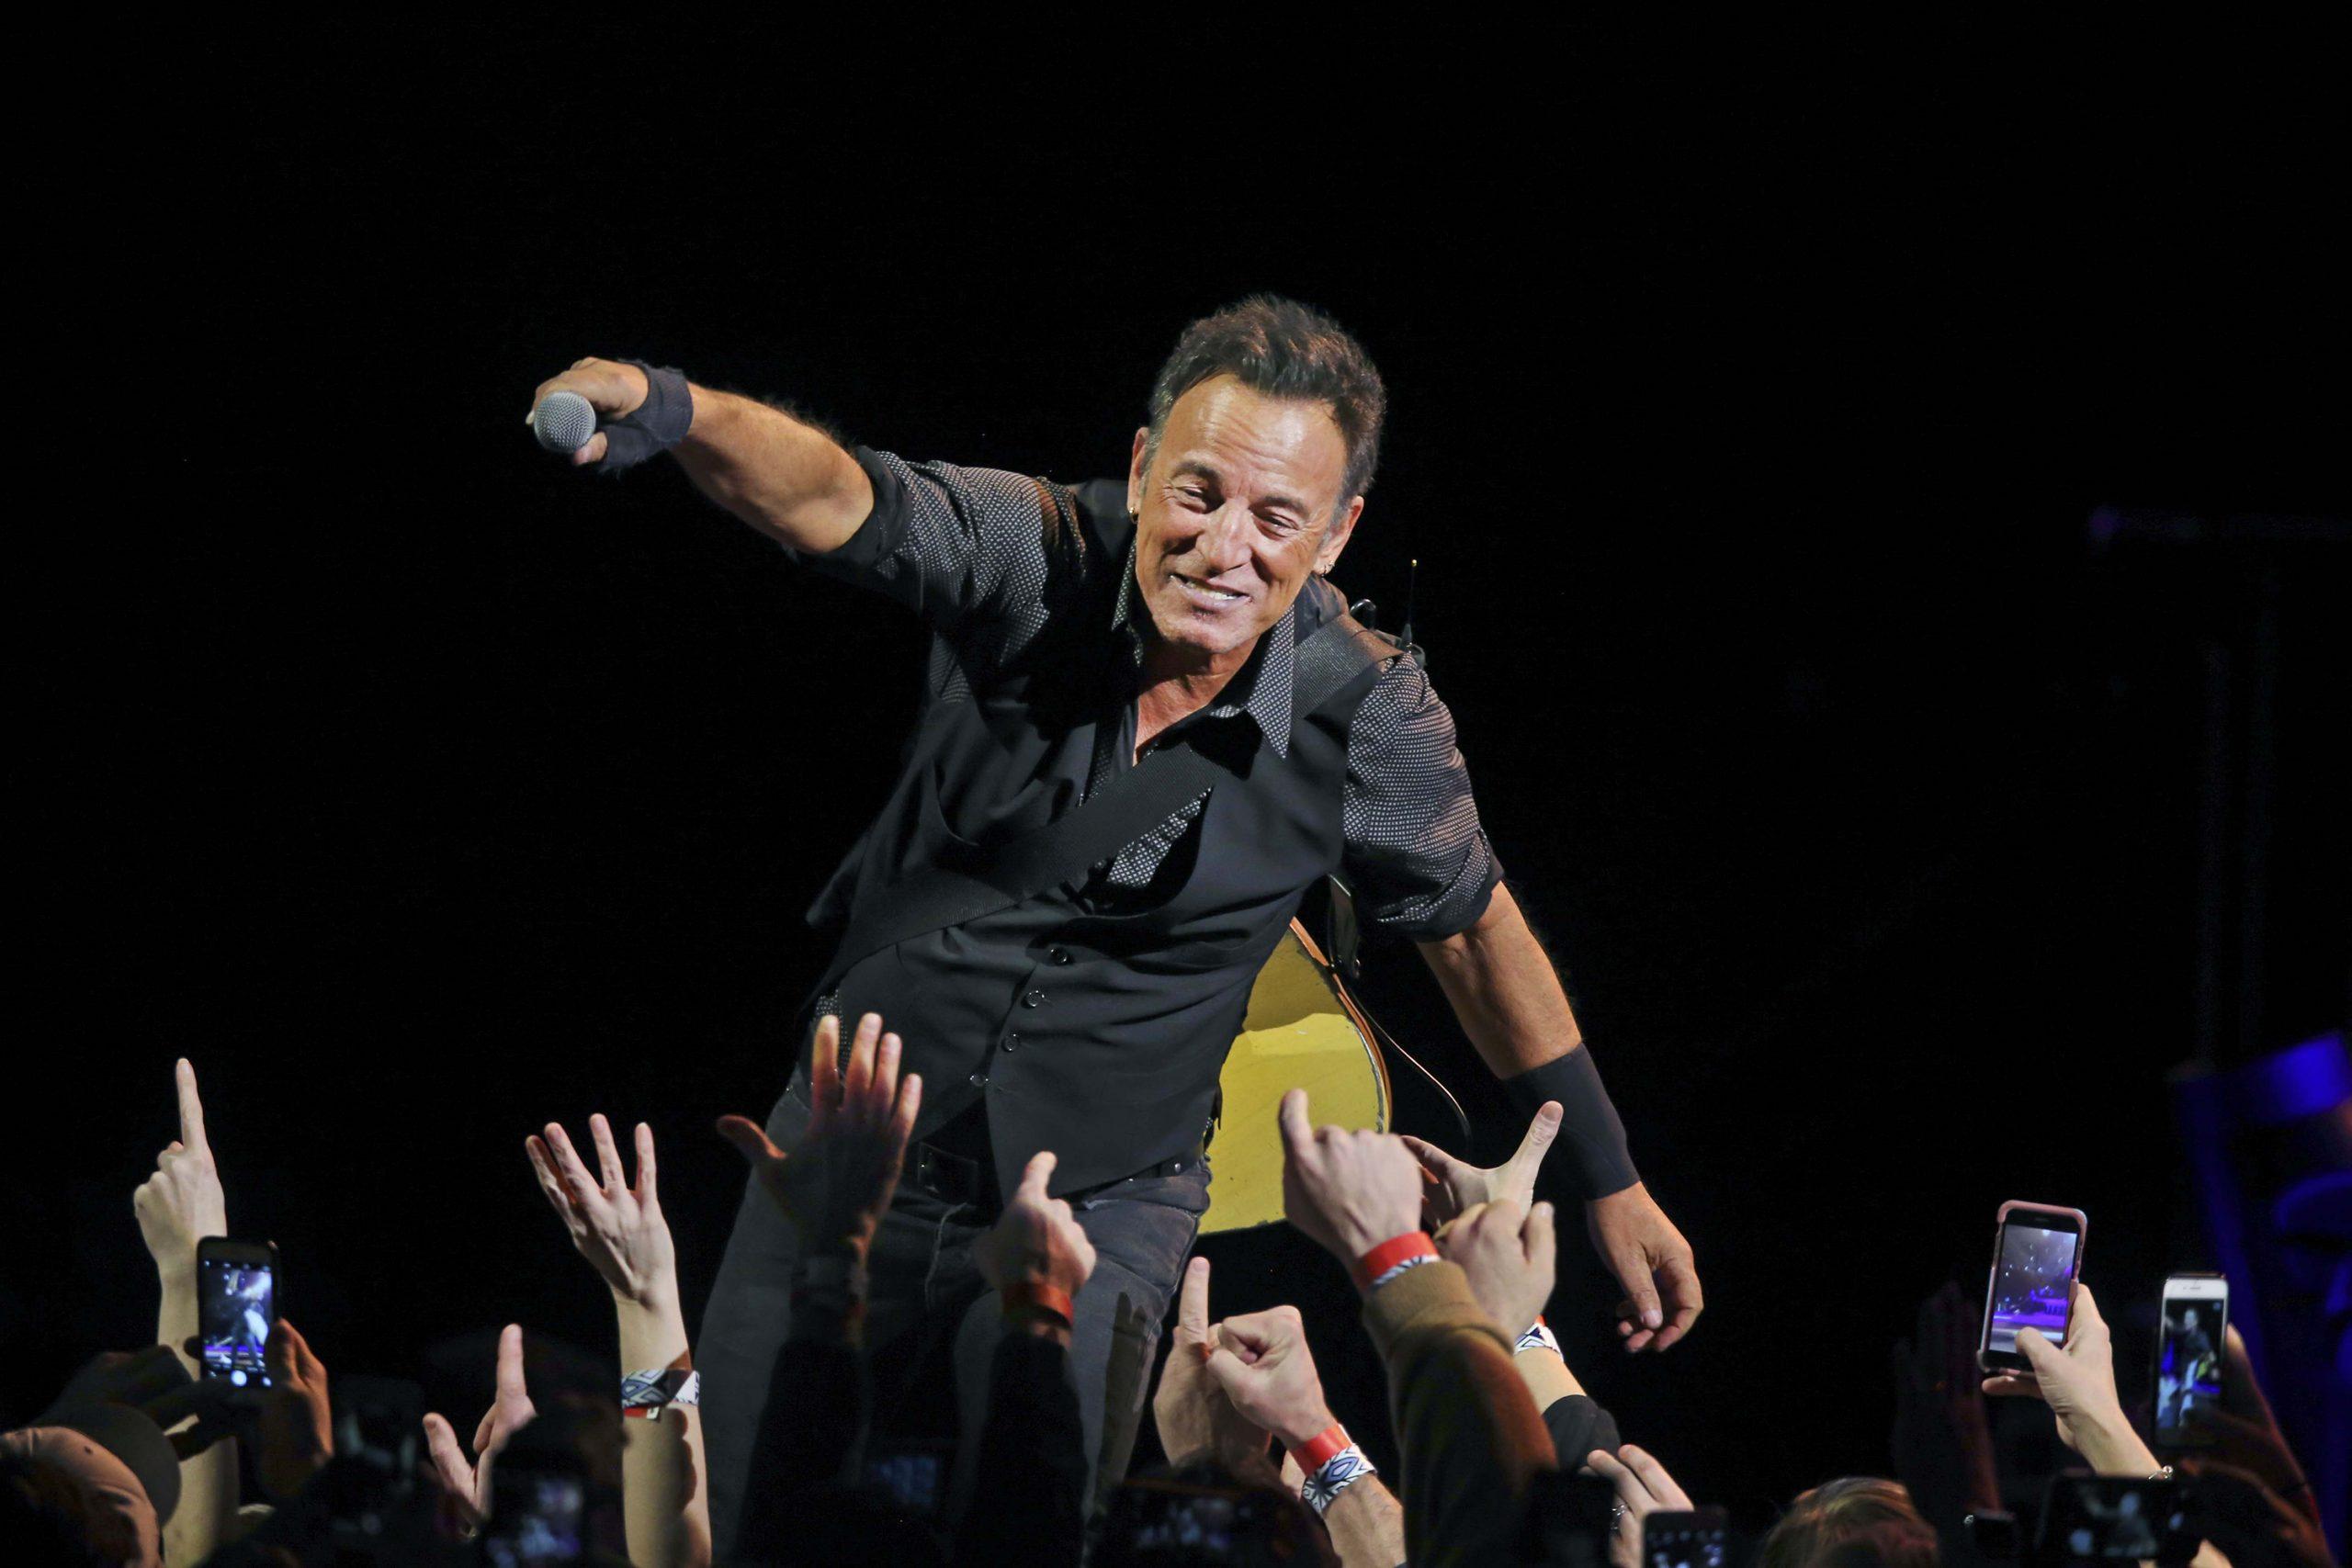 Bruce Springsteen discusses man behind the music